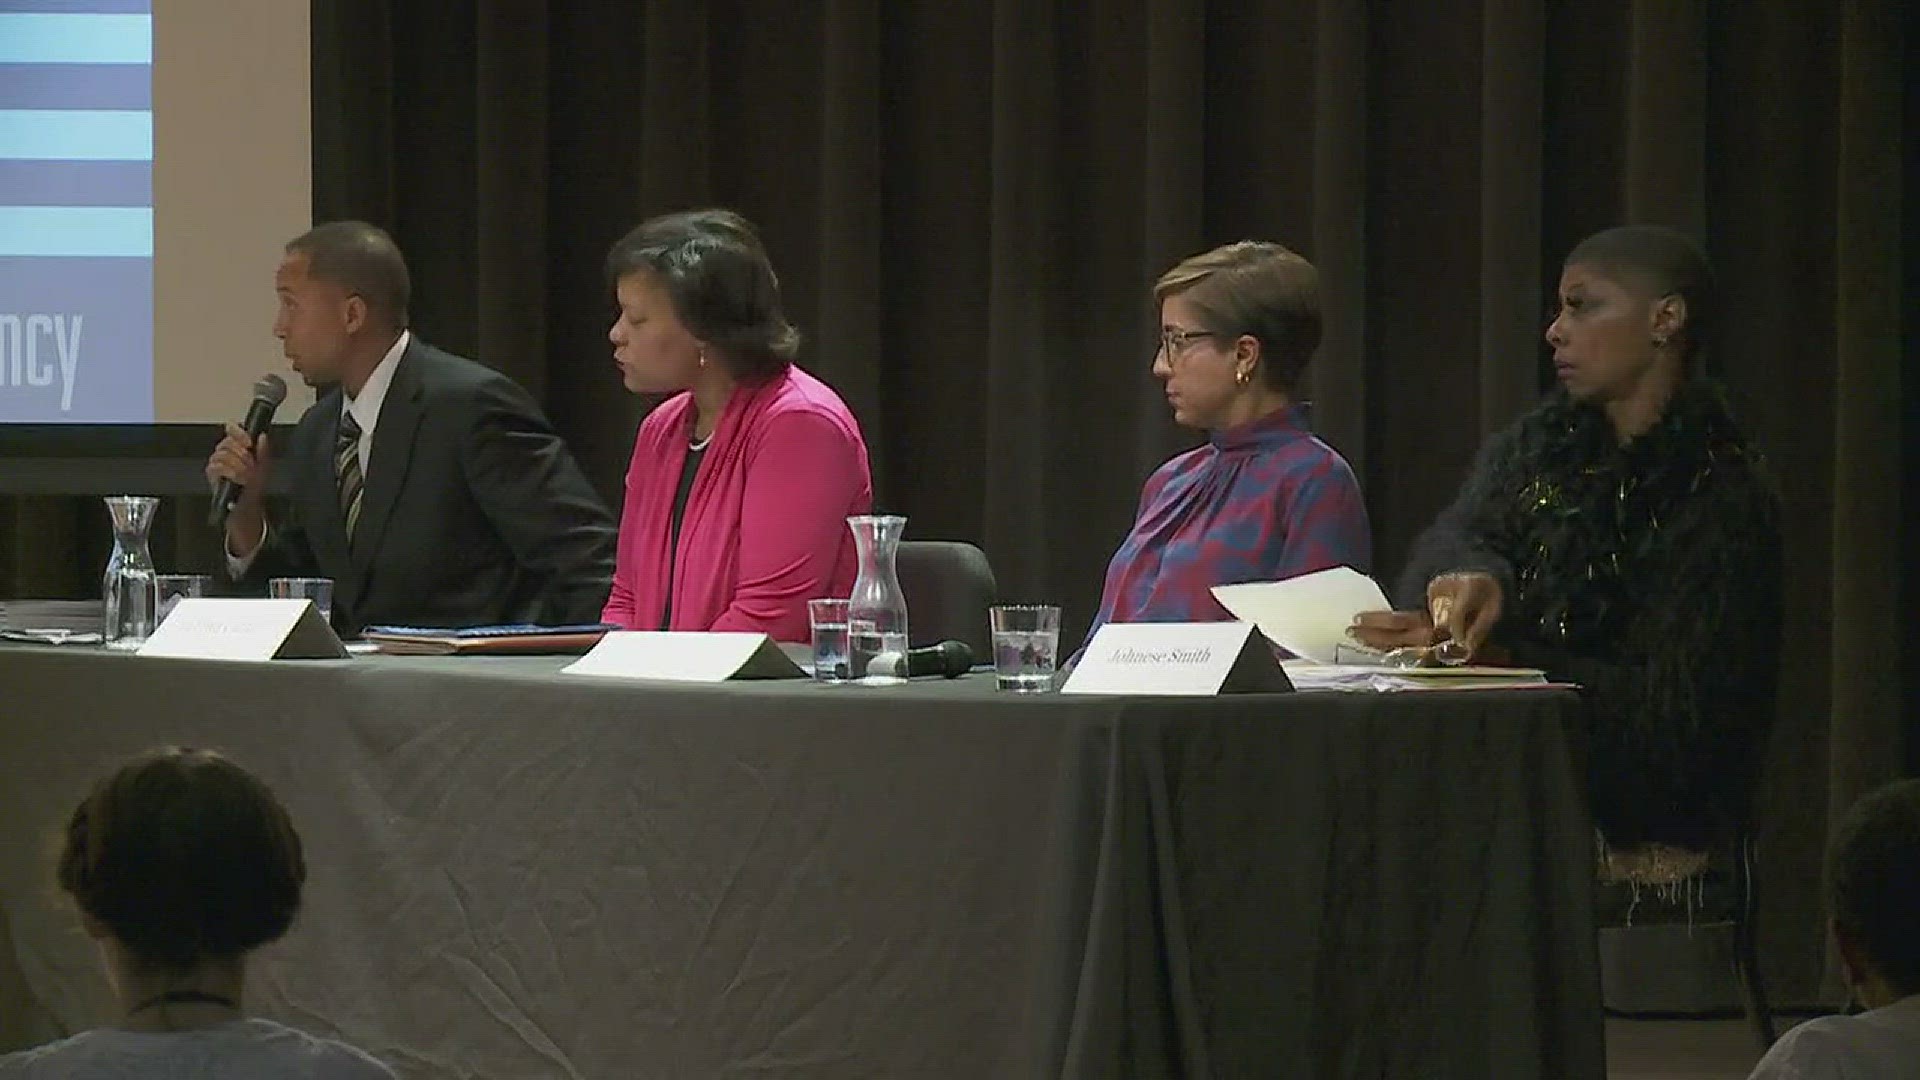 Mayoral candidates attend forum on city's infrastructure